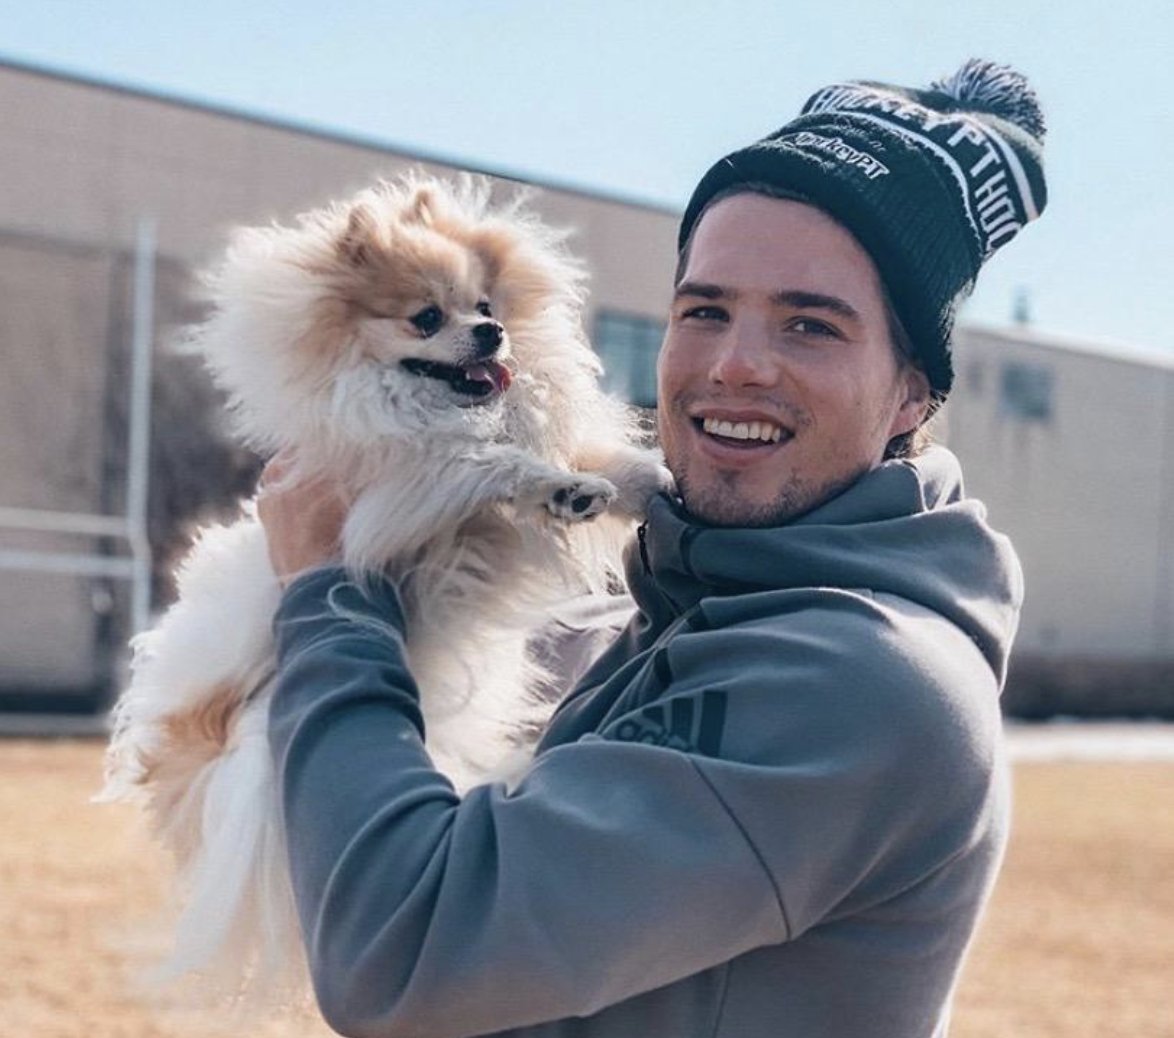 Here's Kevin Fiala with a dogpic.twitter.com/8gqCFCBV4j.